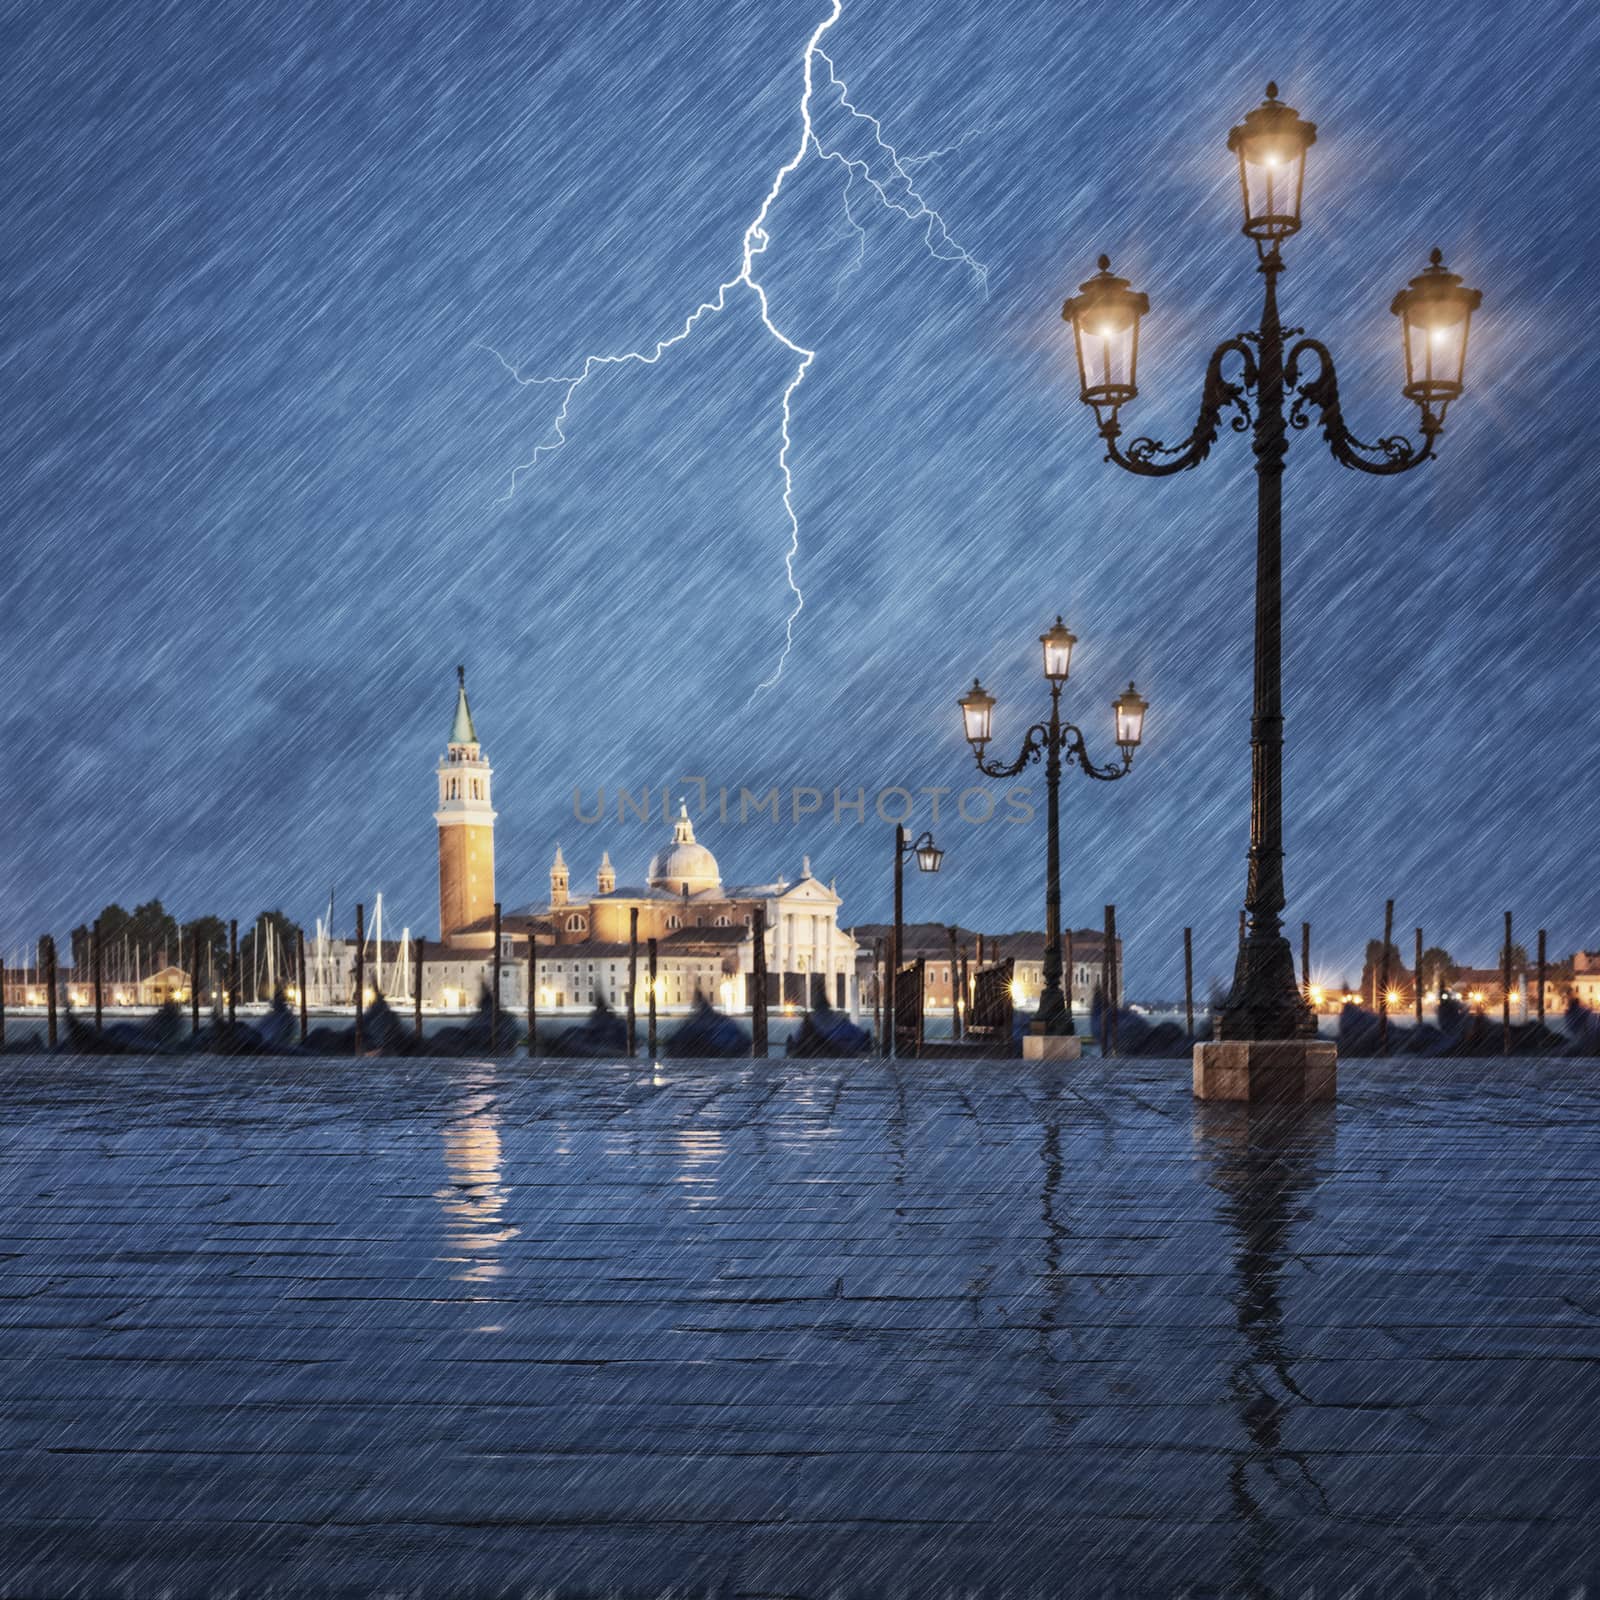 Thunderstorm with lightning in the sky on the Grand Canal by vwalakte